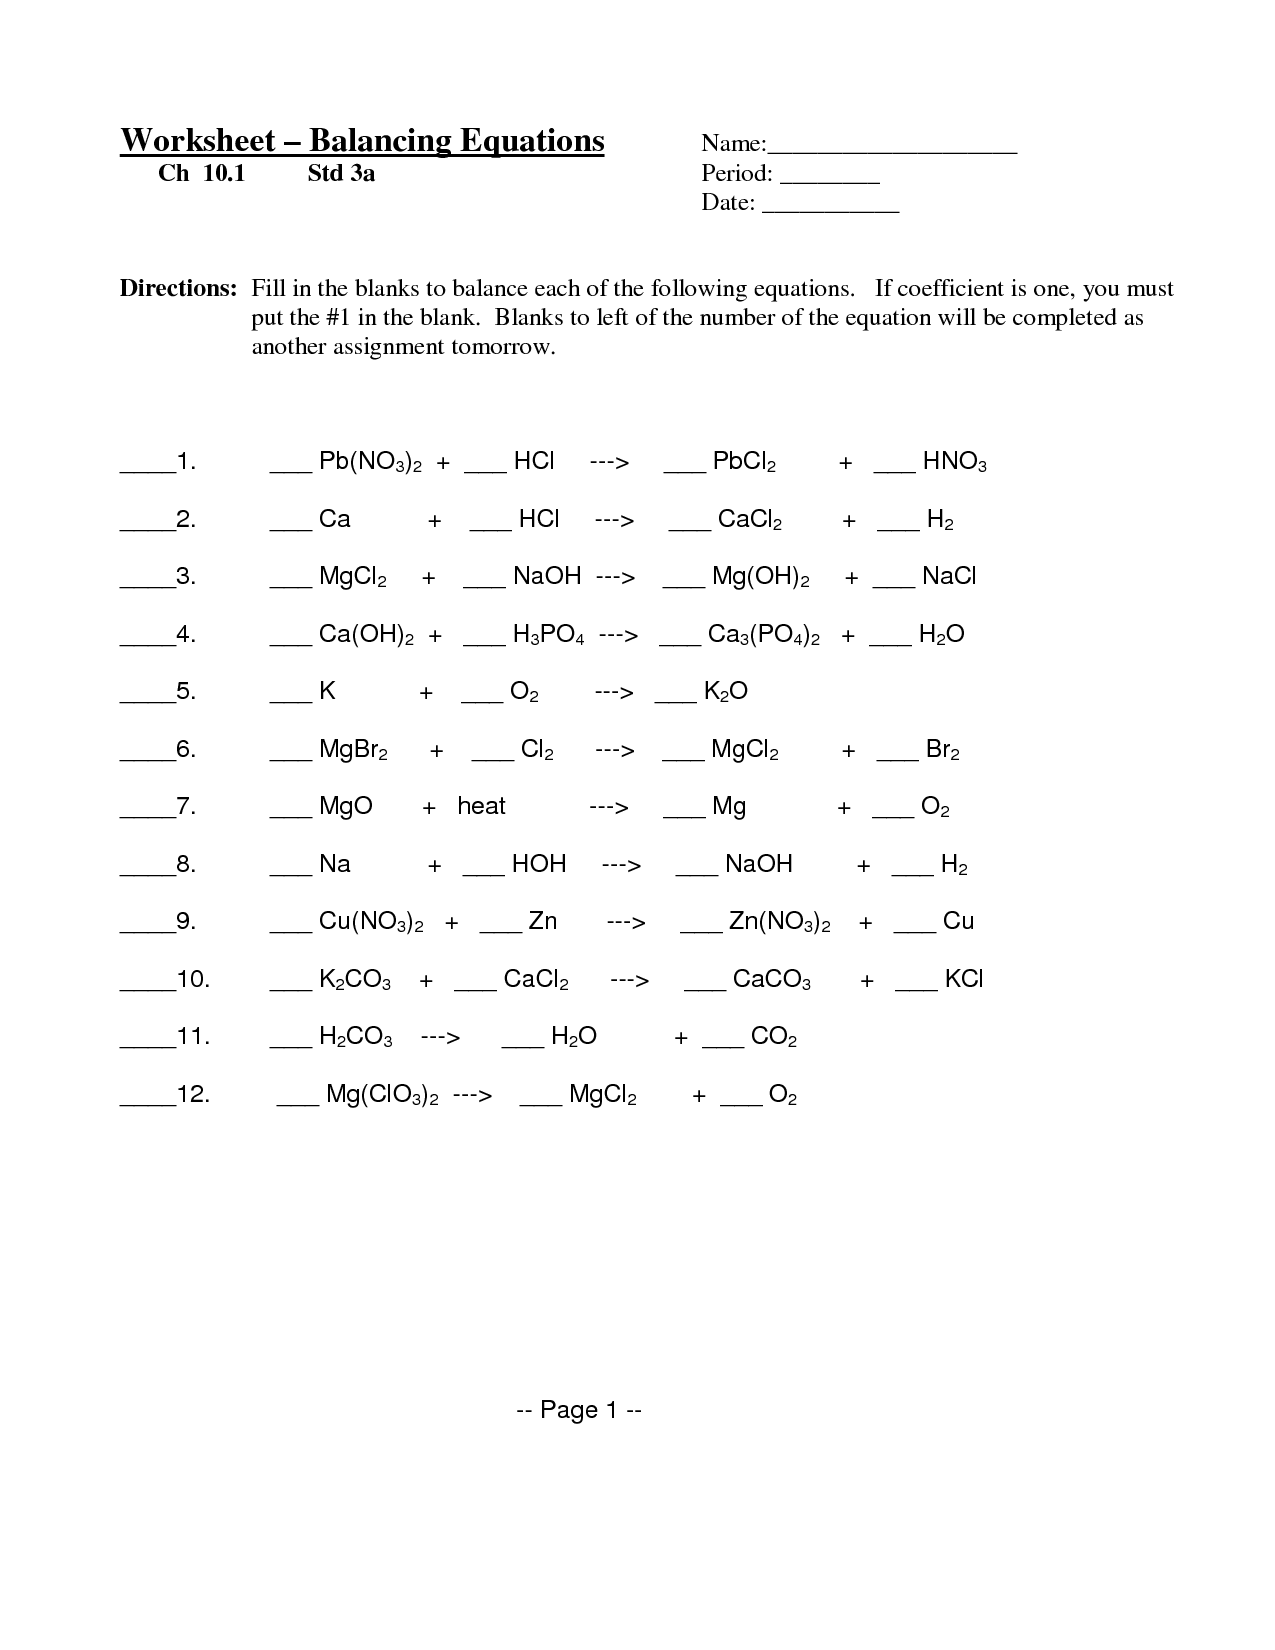 balancing-equations-and-types-of-reactions-worlsheet-key-35-types-of-reactions-worksheet